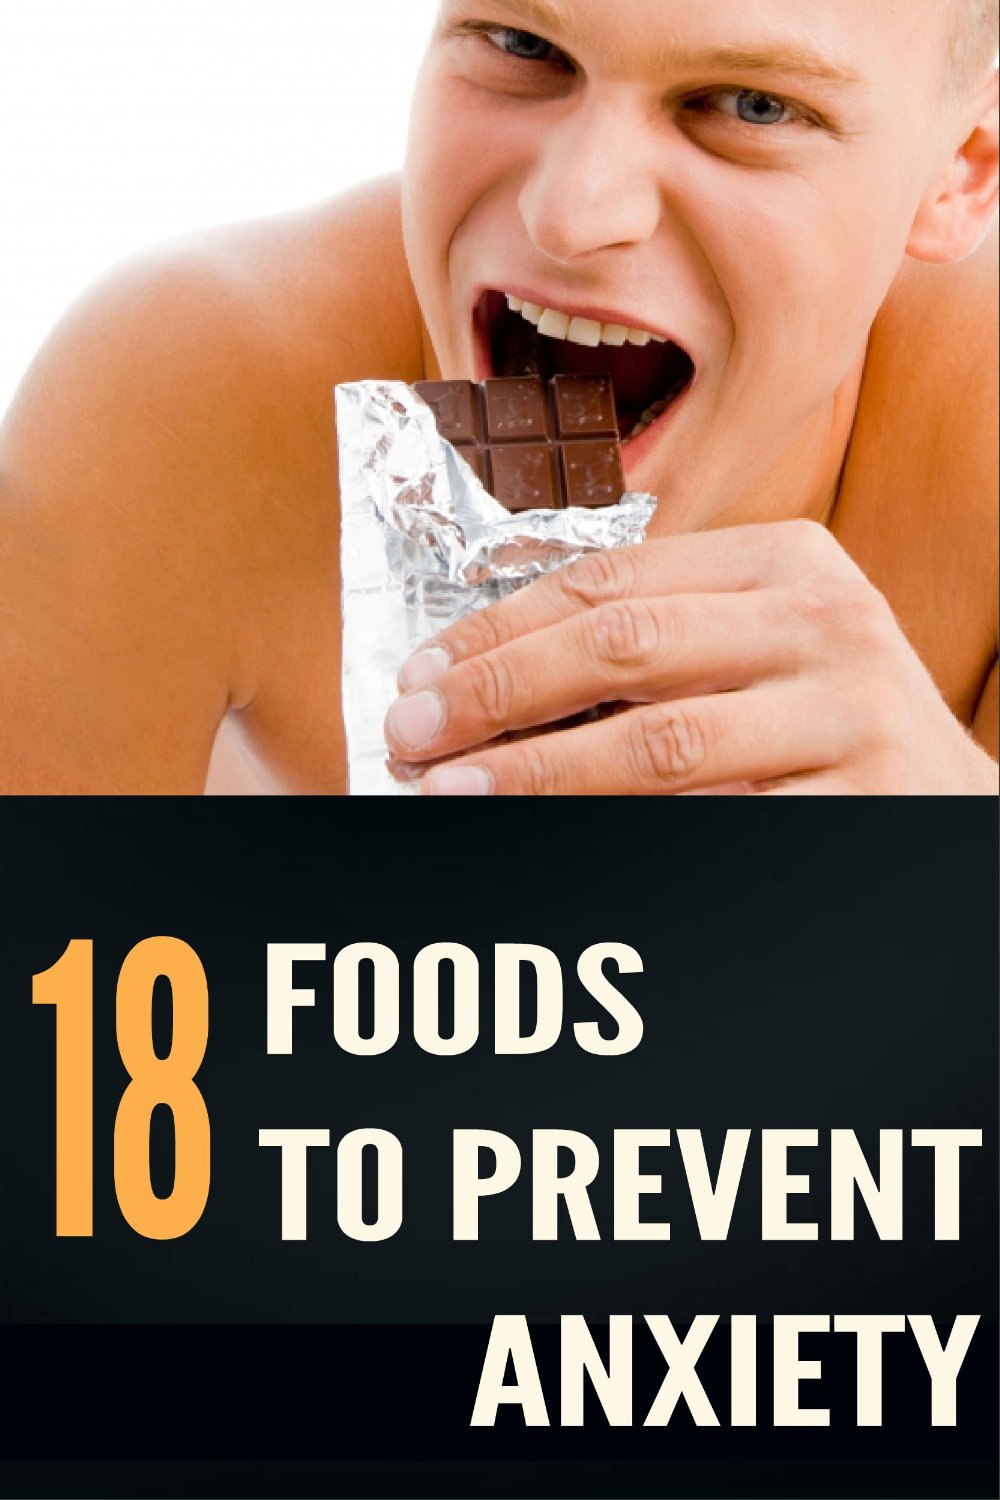 Preventing Panic And Anxiety Attacks With 18 “Anti-Anxiety” Foods: How To Overcome Anxiety, Panic Attacks And Social Anxiety? by Ben Buckland